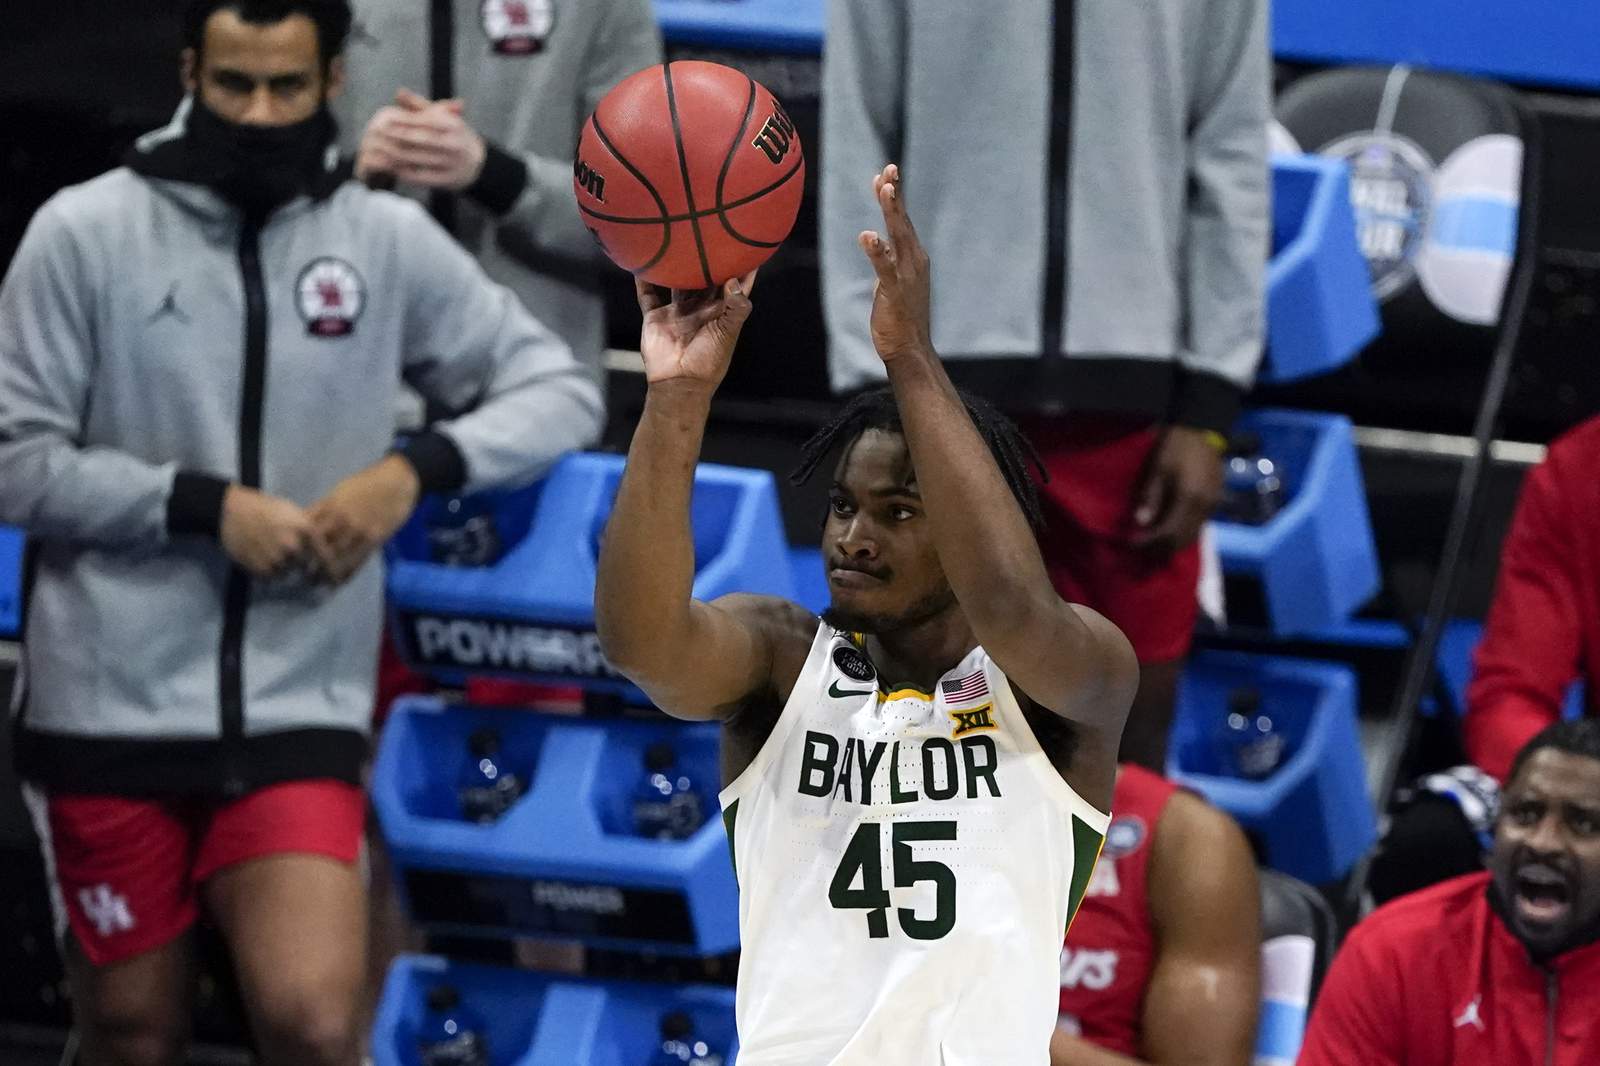 It’s on: Gonzaga vs. Baylor for the national championship